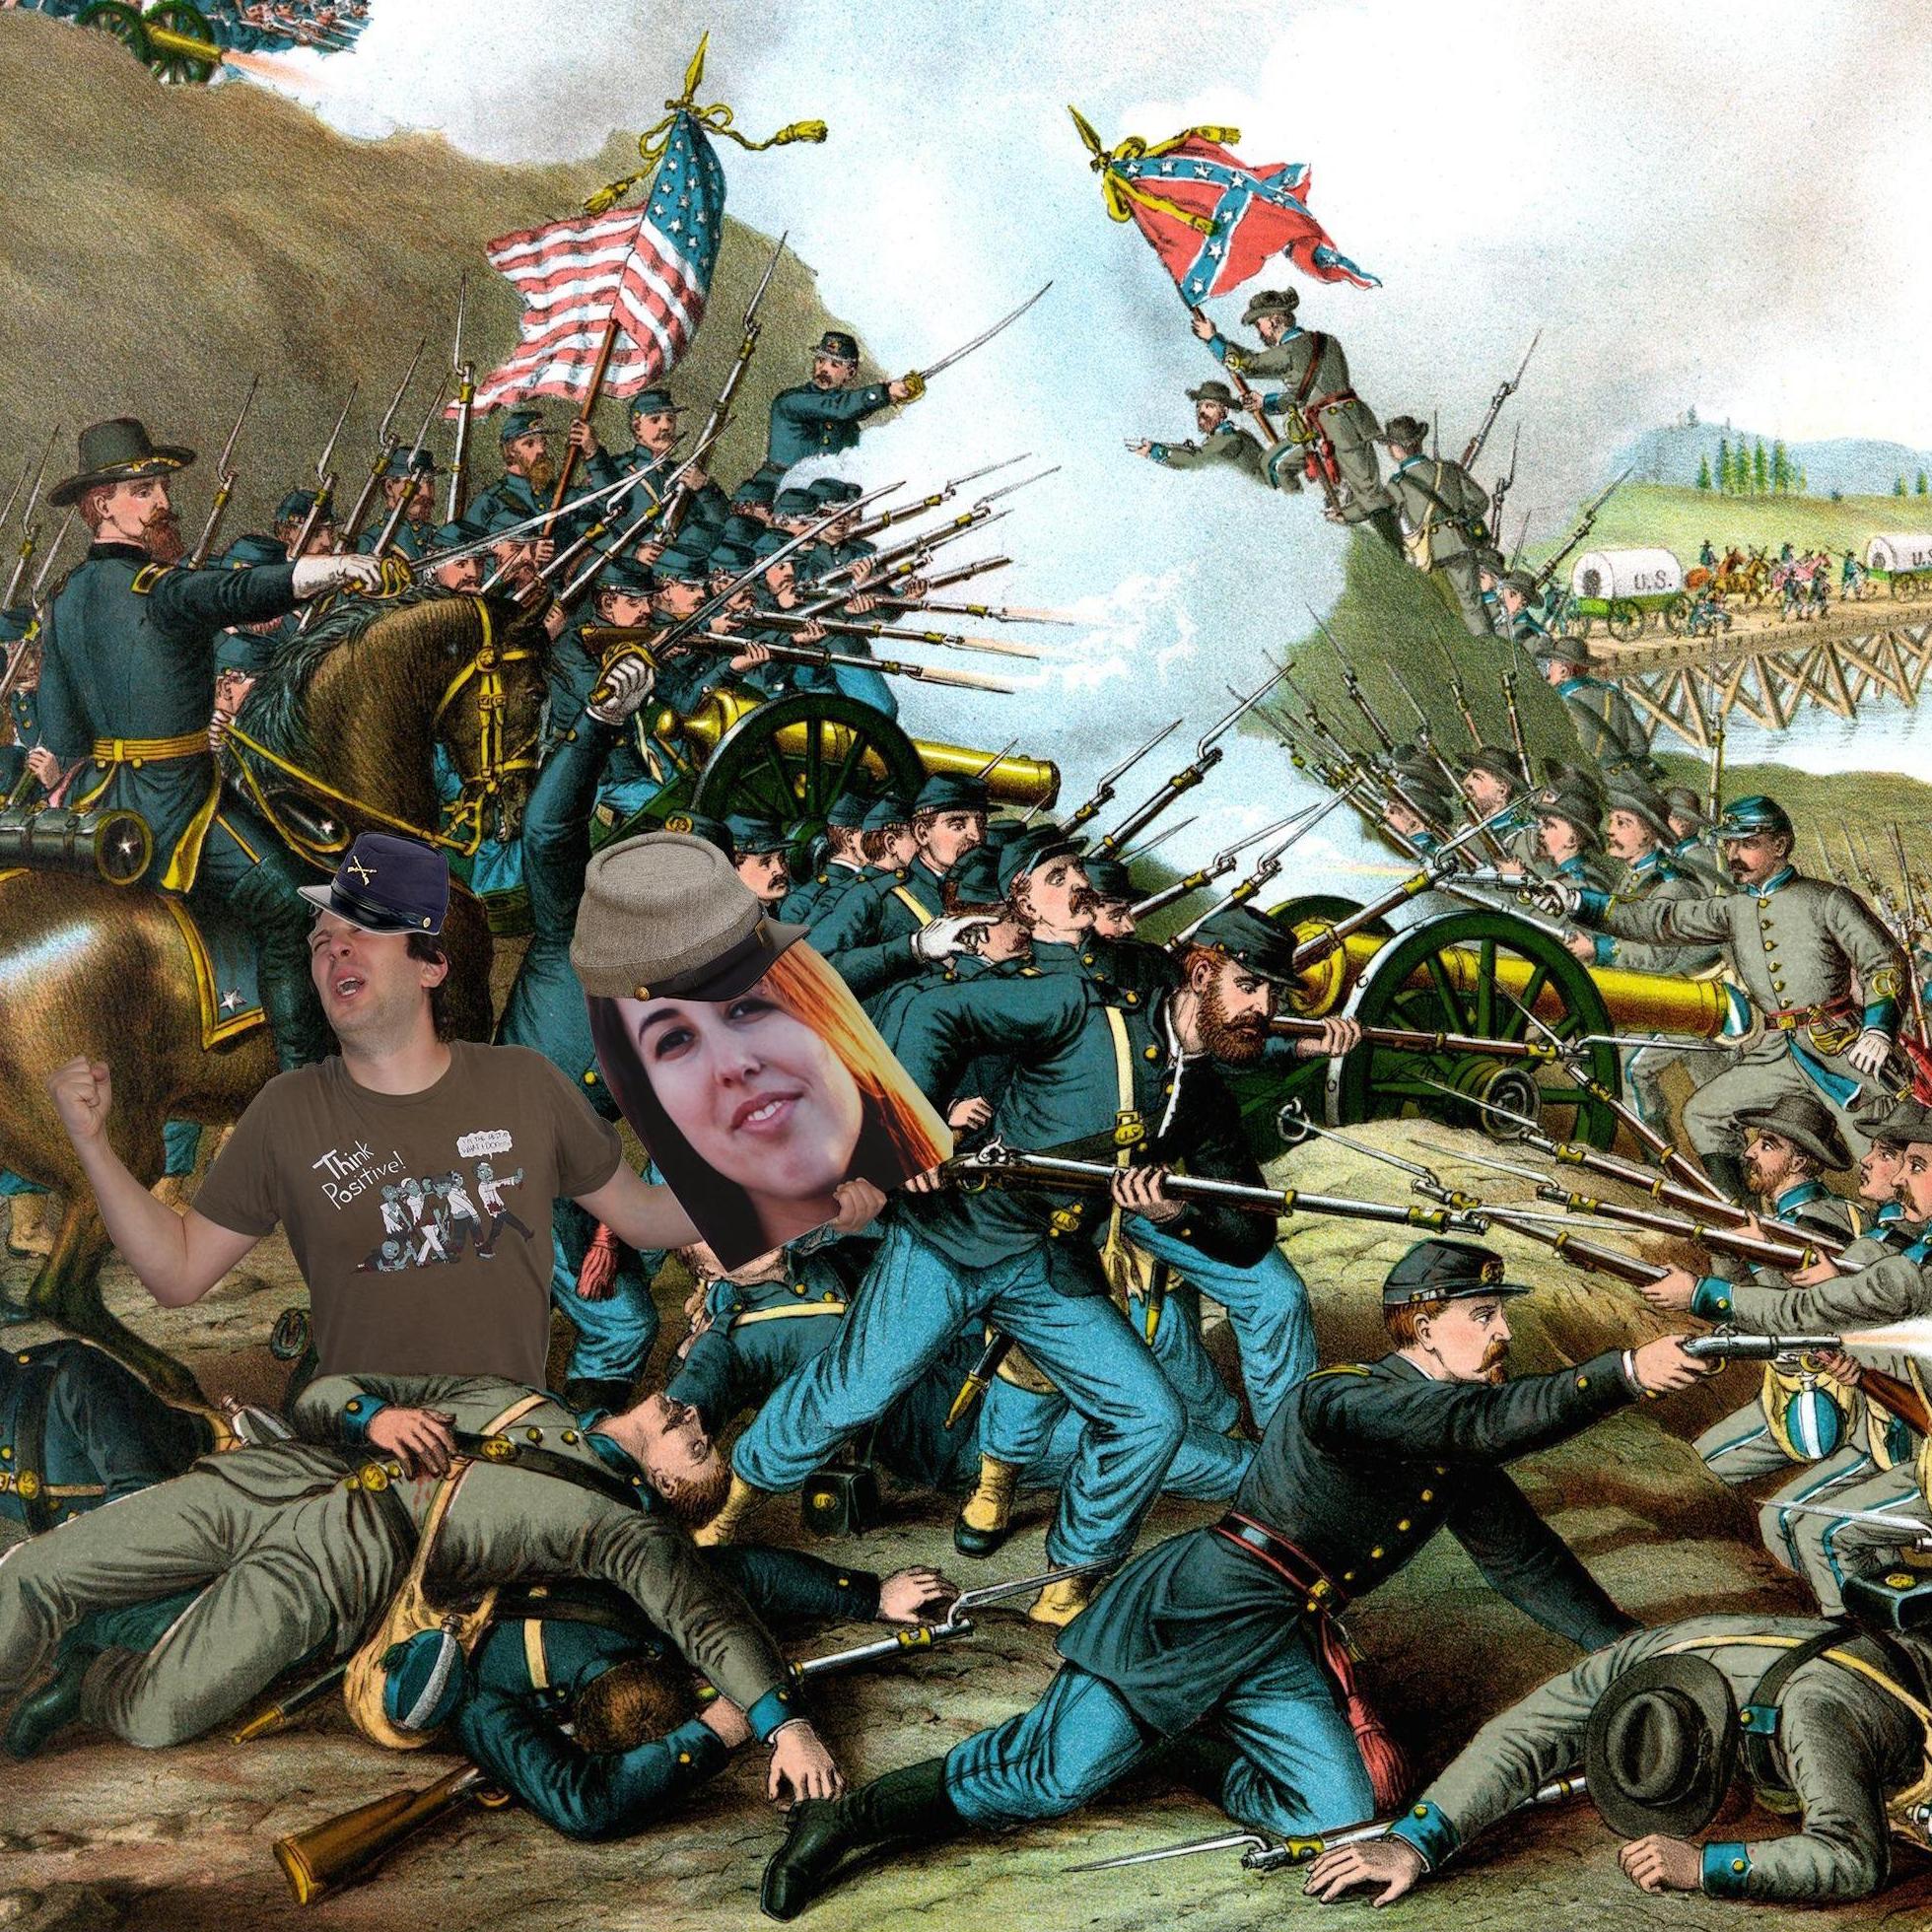 You know, that time we fought for opposing sides in the Civil War! Obviously.